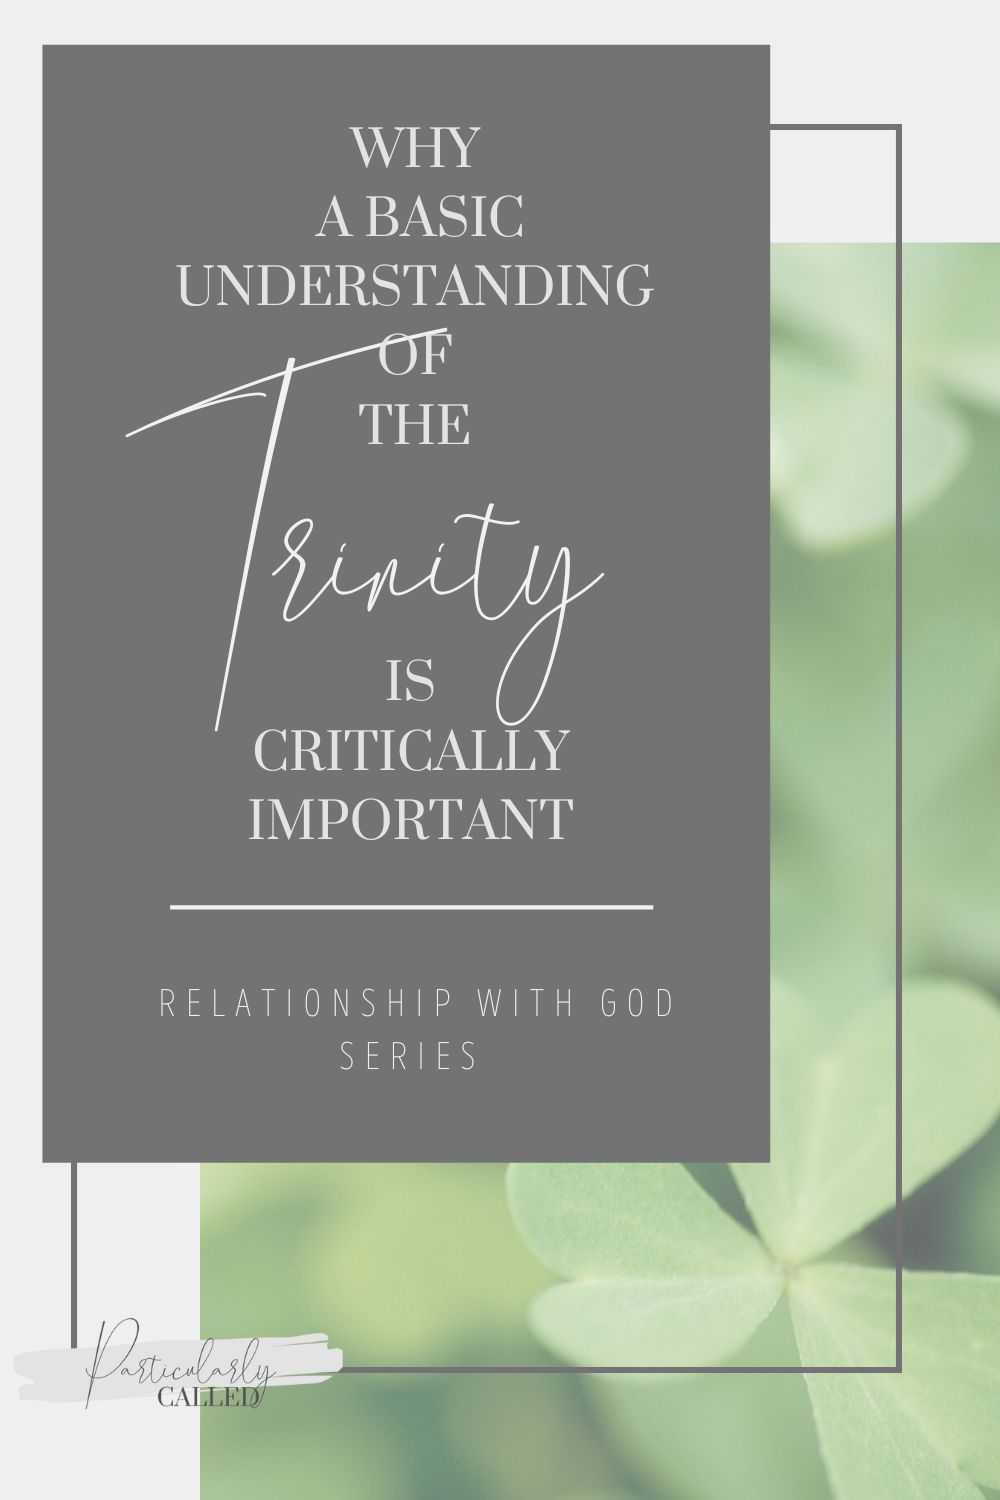 who-is-god-why-it-is-so-important-to-understand-the-trinity